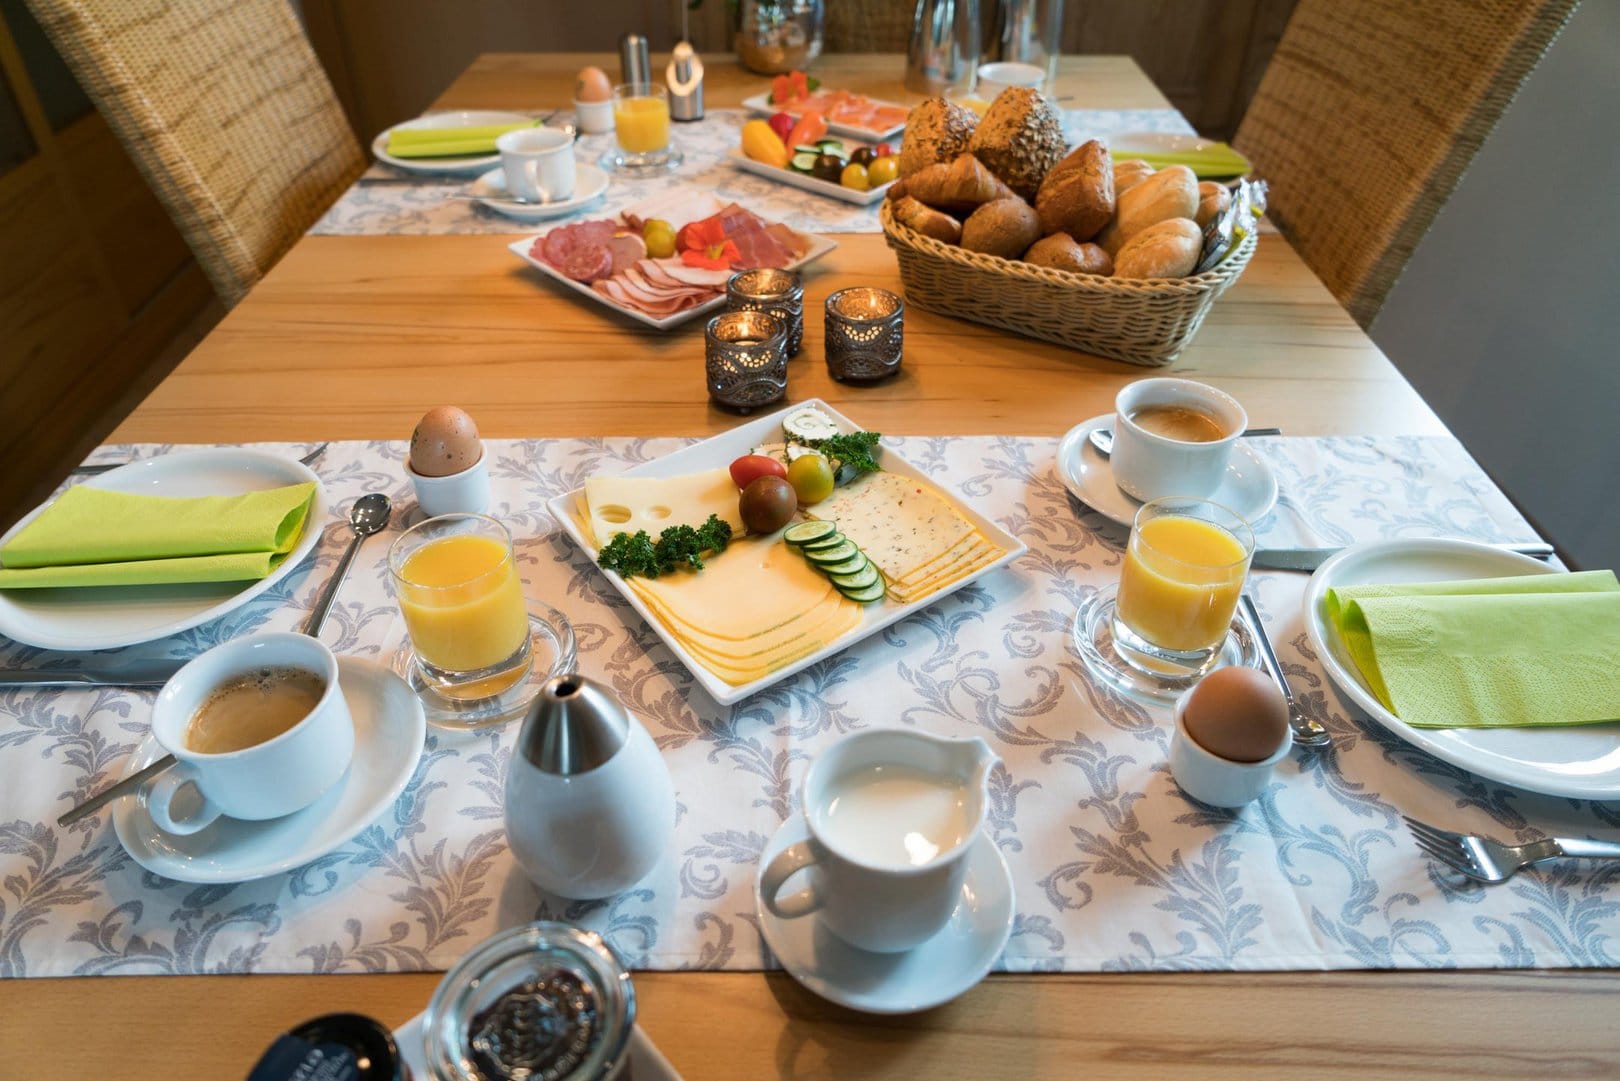 A breakfast table, generously set with coffee cups, eggs, orange juice, meats, cheeses and bread.